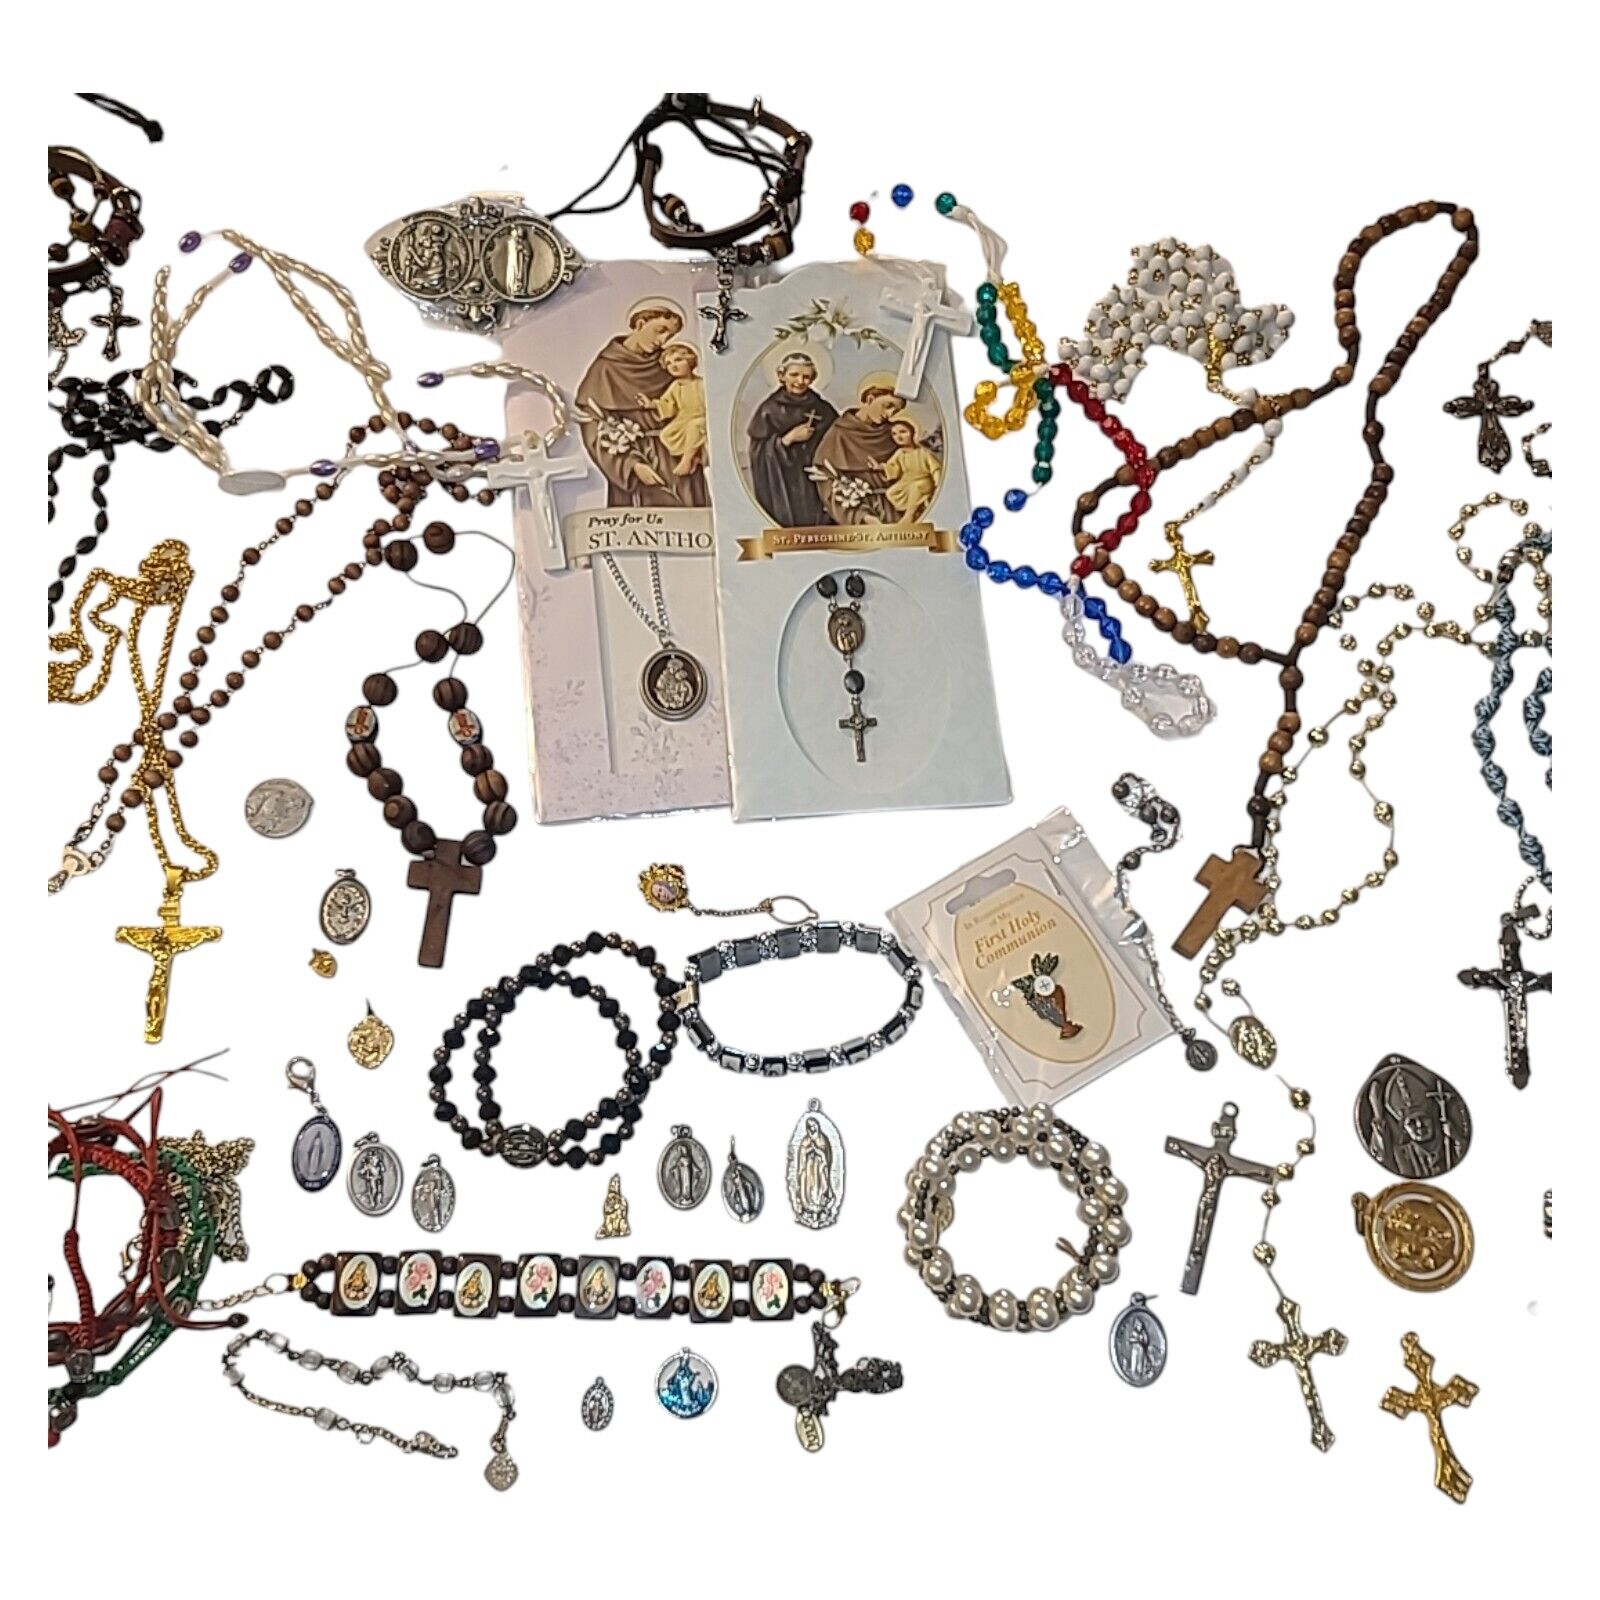 56 Piece Catholic Religious Jewelry Lot Rosaries Medals Pins Saints New &Vintage